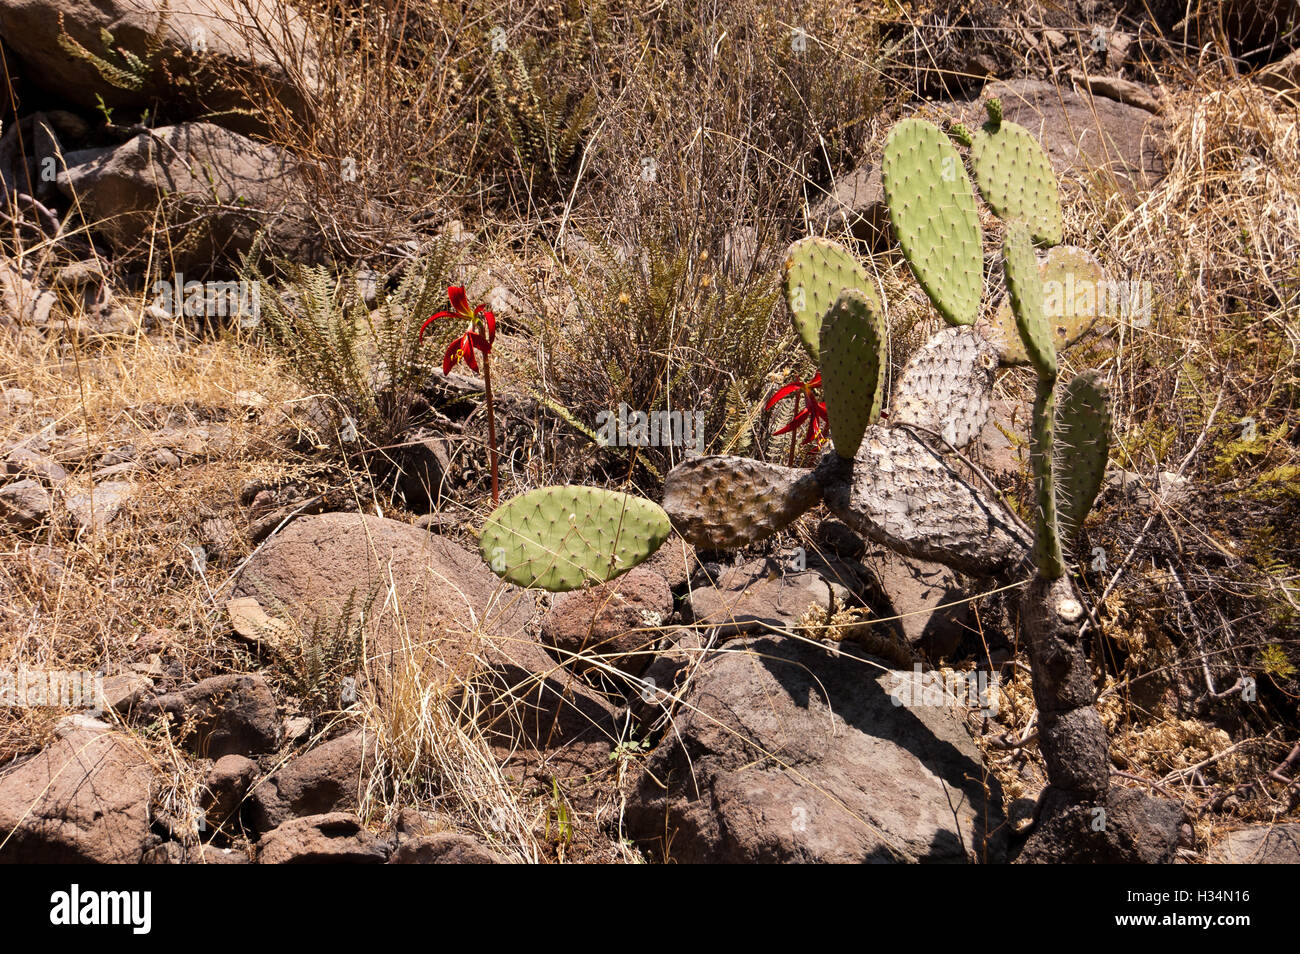 Shrubland vegetation, prickly pear cactus and aztec lily Stock Photo